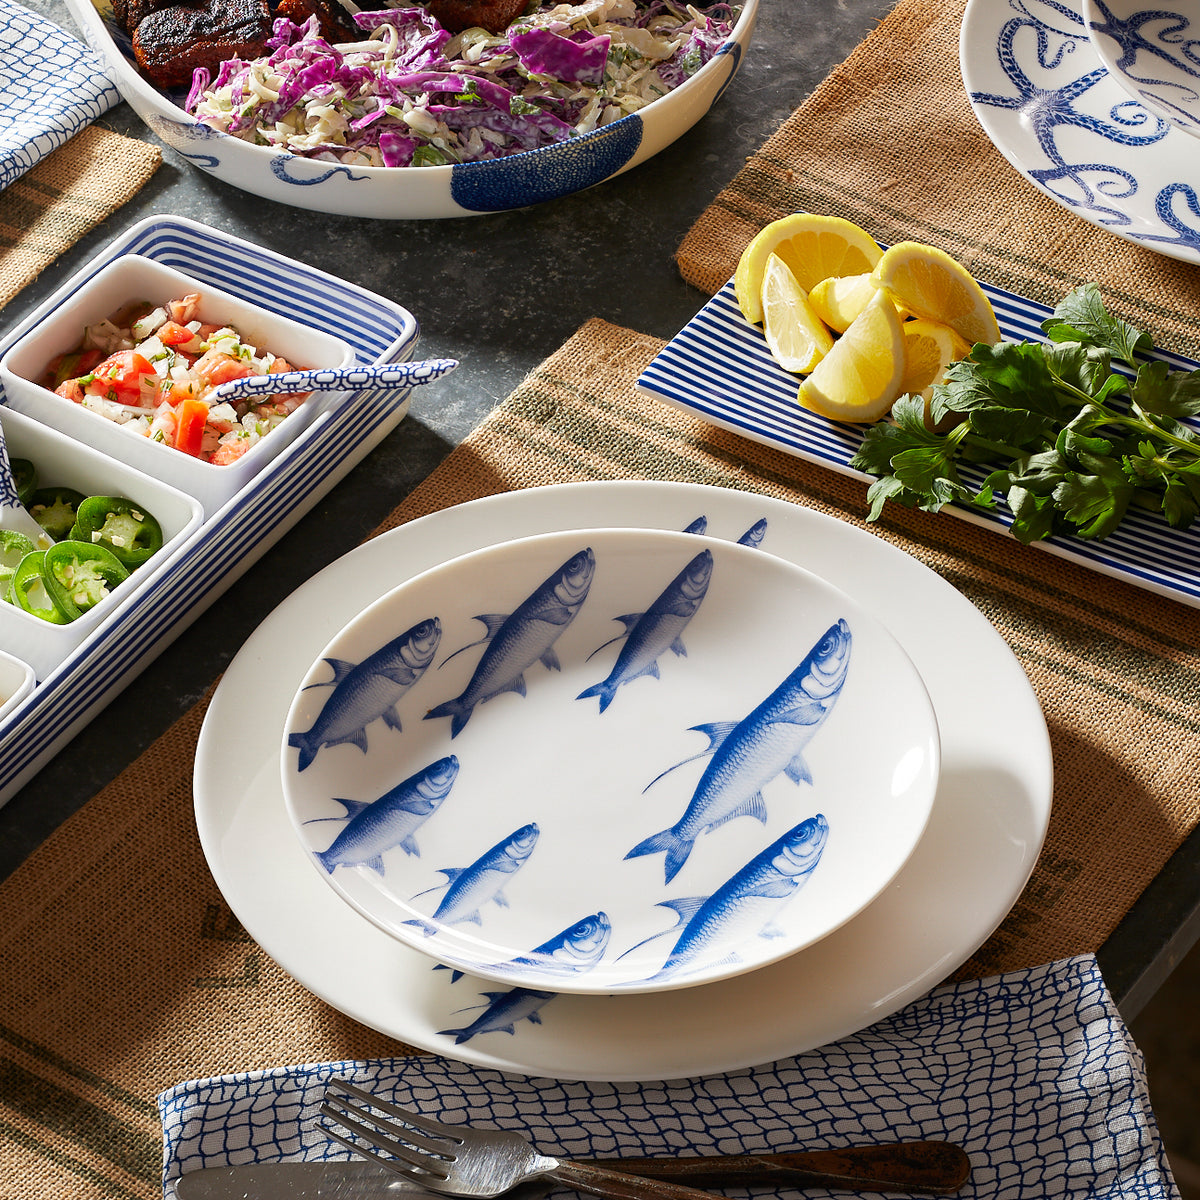 A School of Fish Coupe Salad Plate from Caskata Artisanal Home, featuring blue fish.